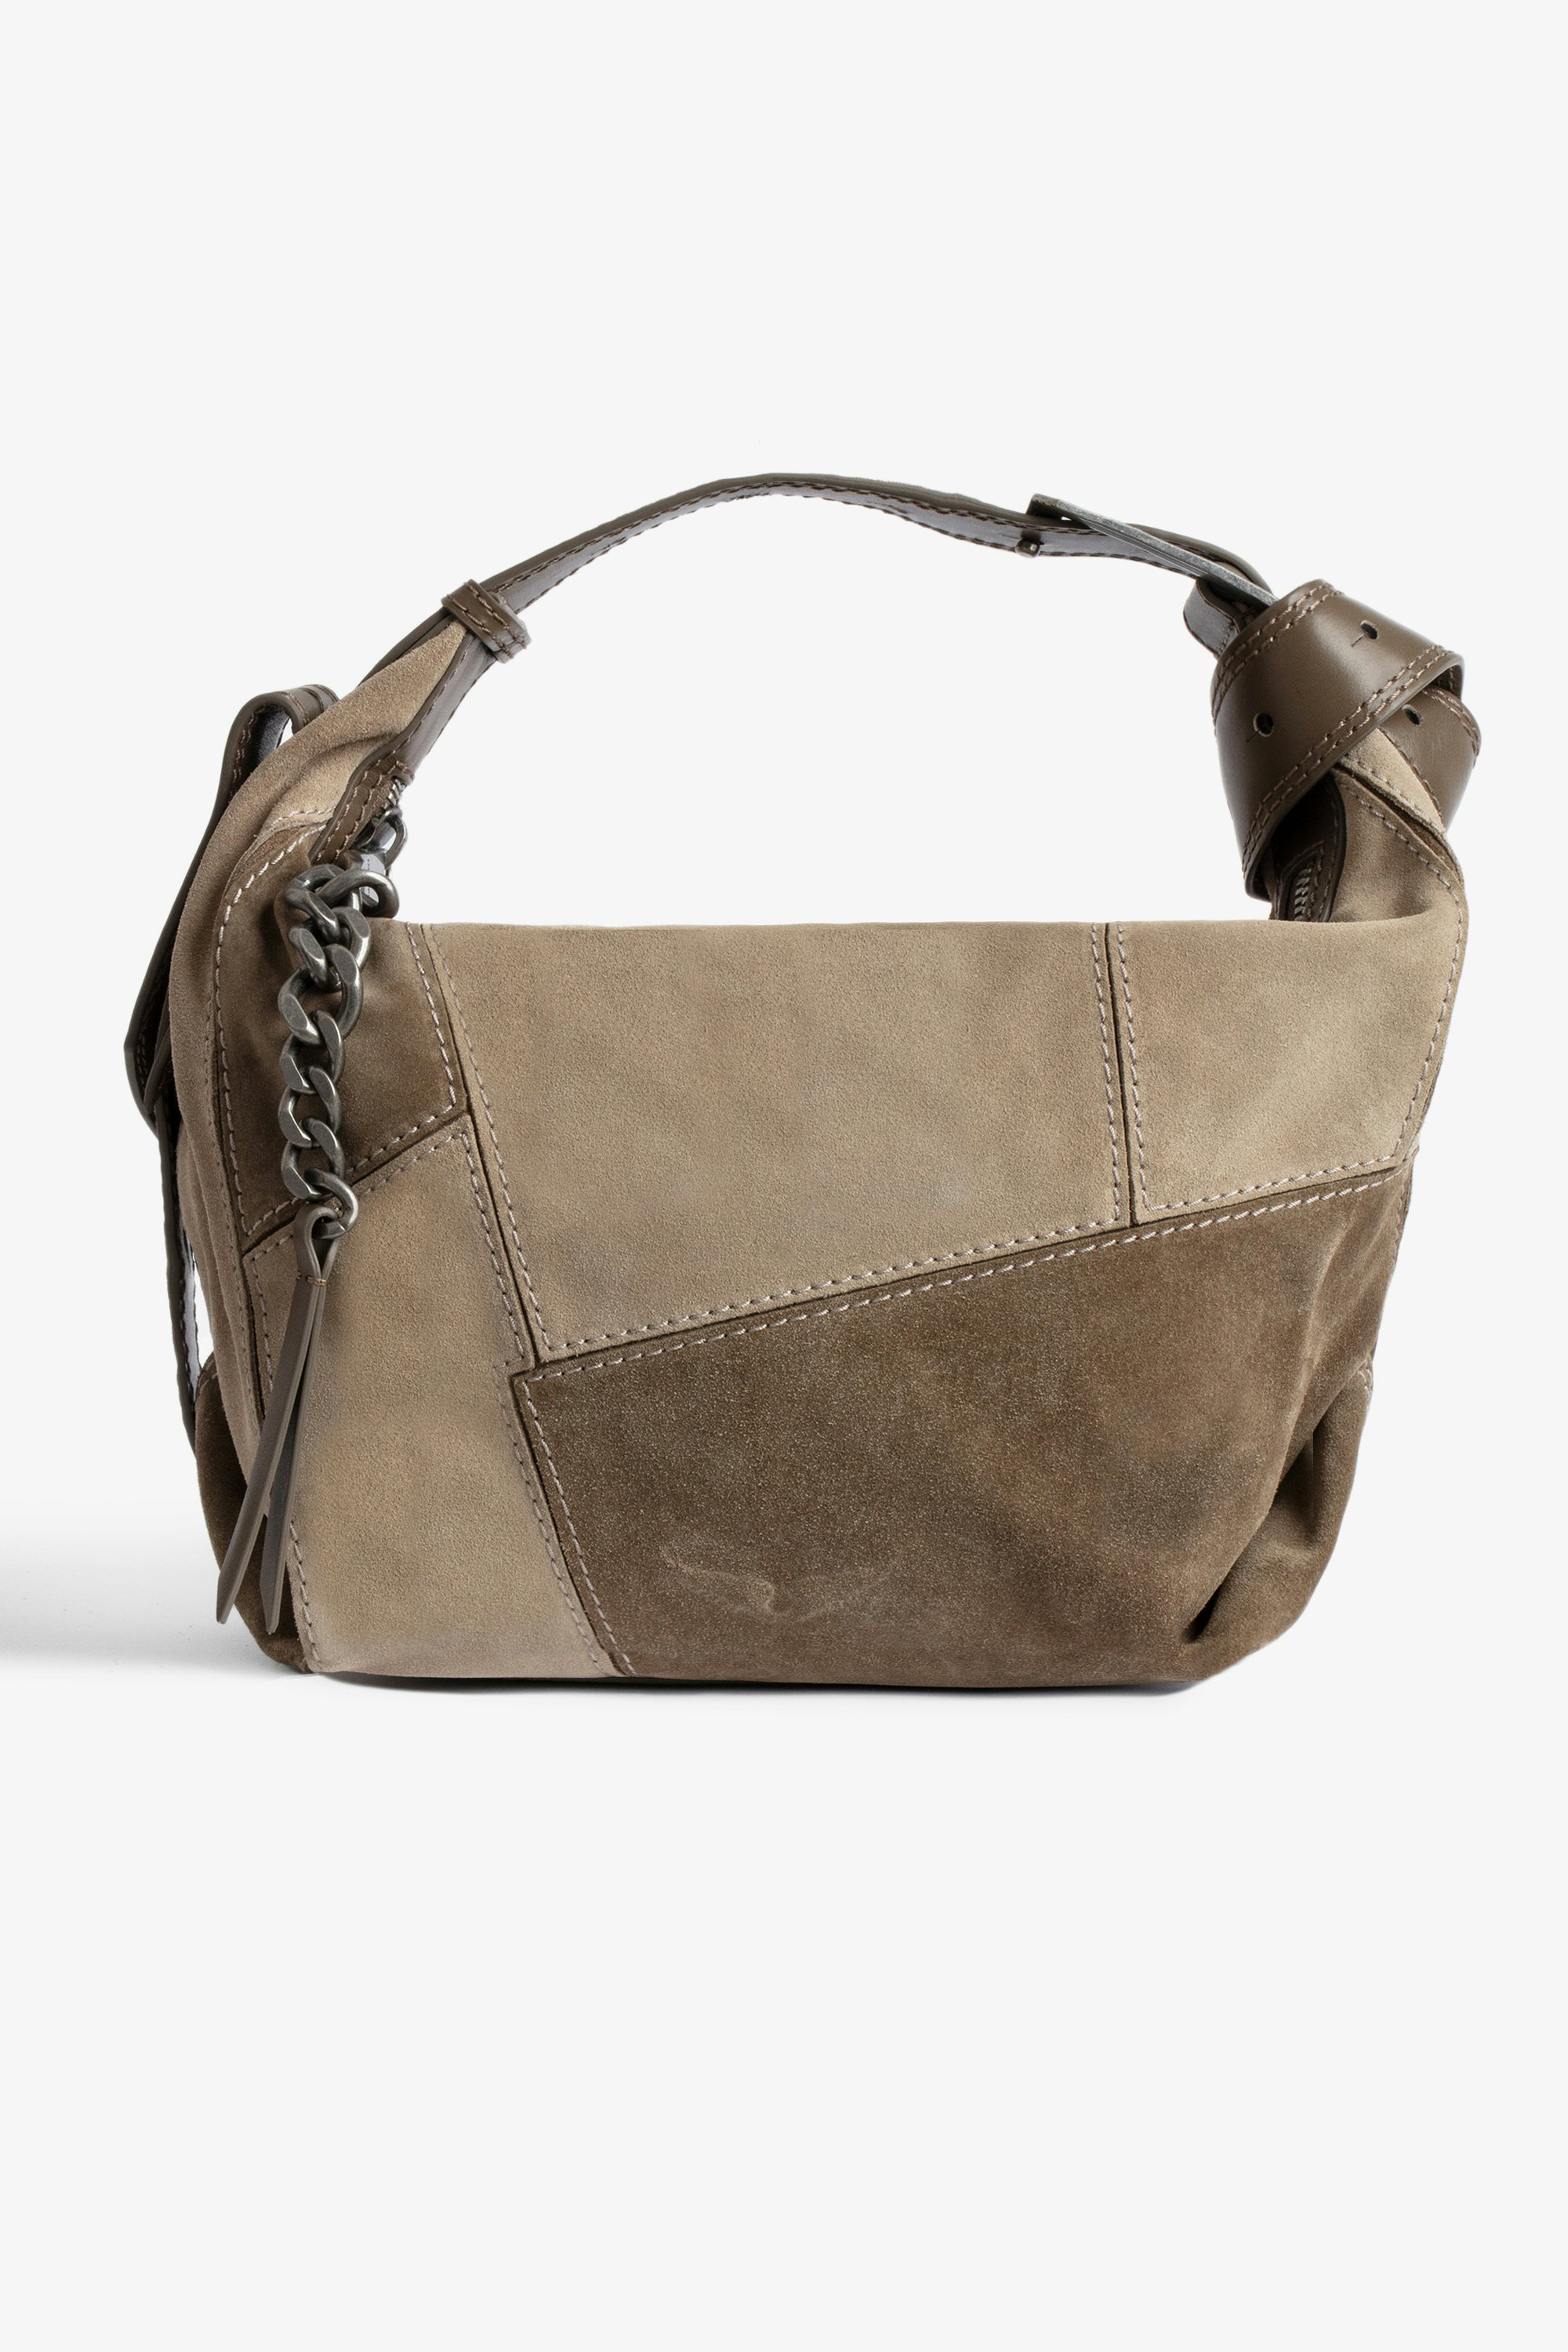 Le Cecilia スエードバッグ Women’s bag worn over the shoulder or across the body in patchwork of beige suede